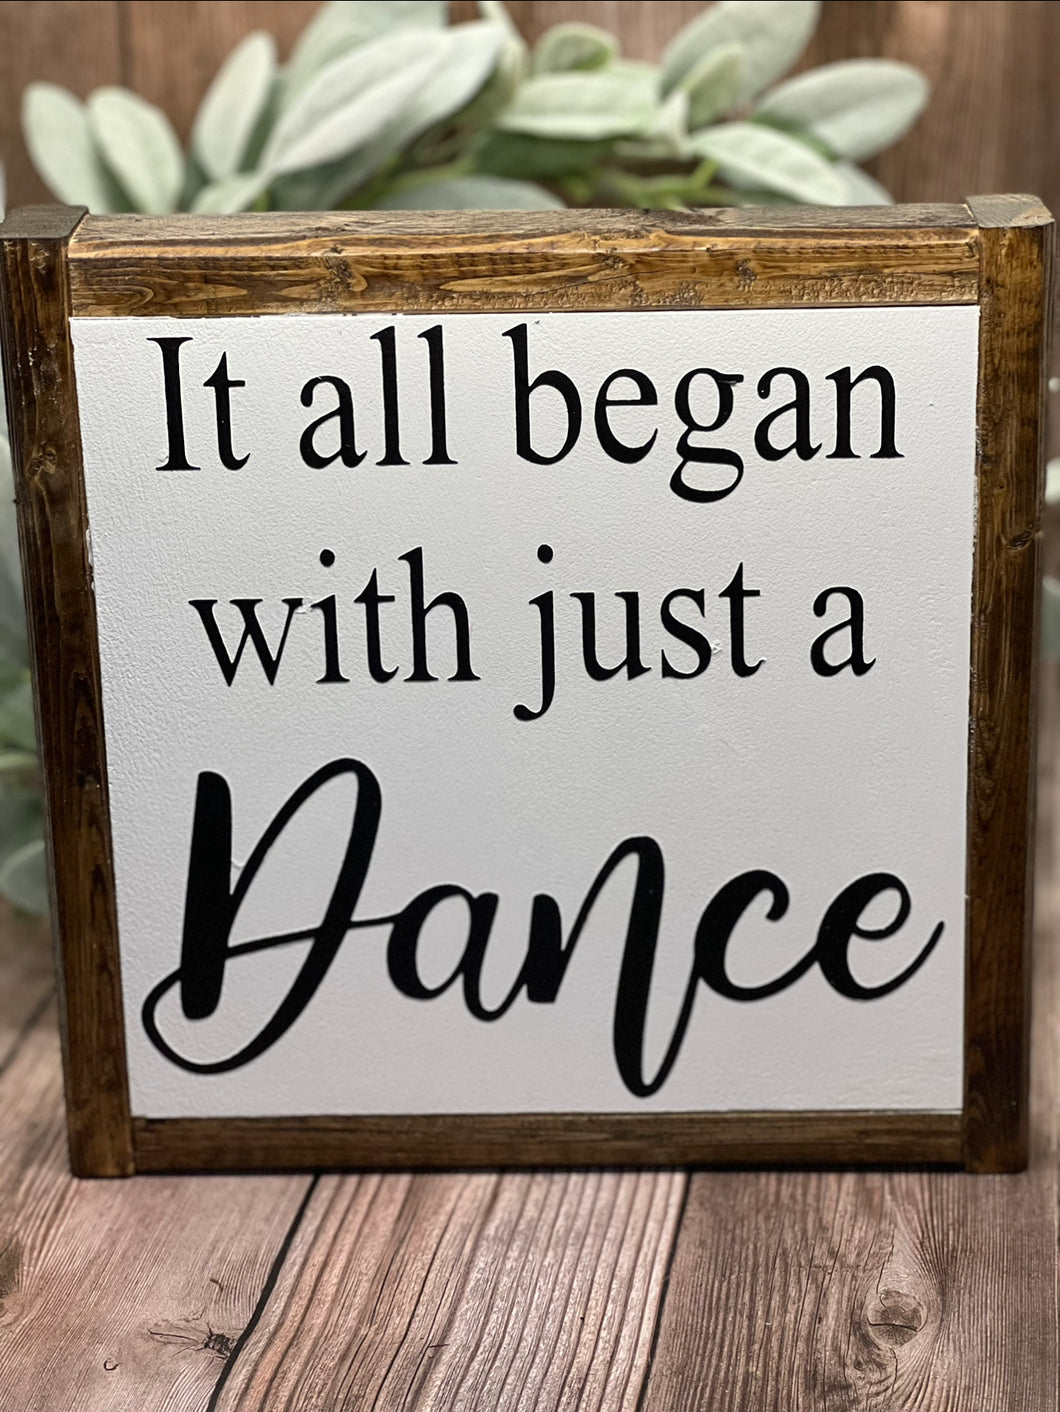 It all began with just a Dance